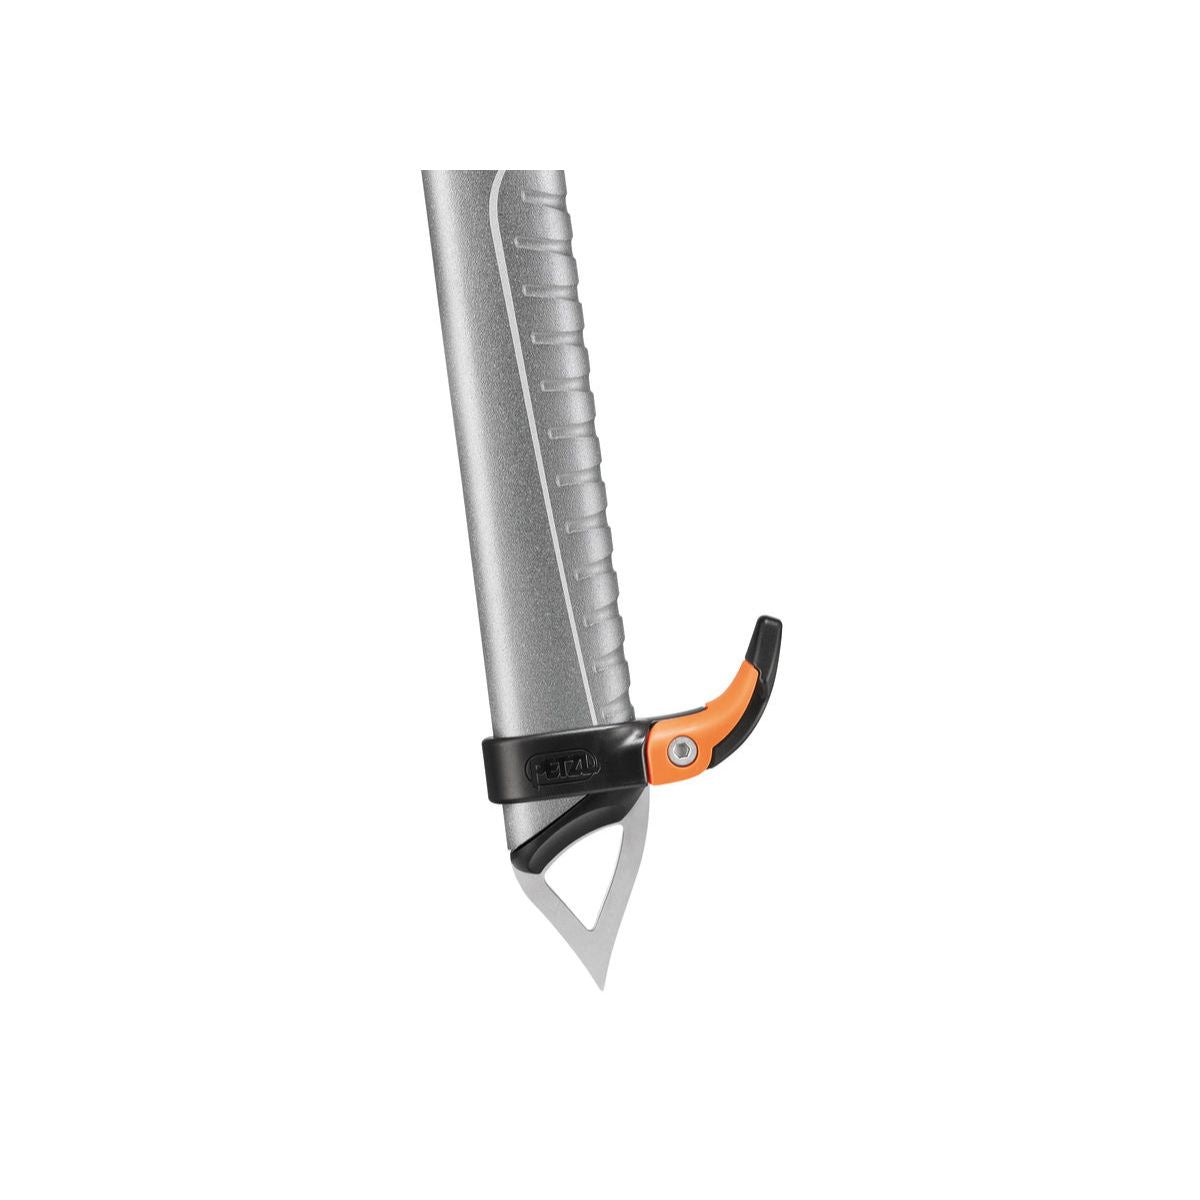 Petzl Trigrest trigger for summit ice axes in black and orange on ice axe